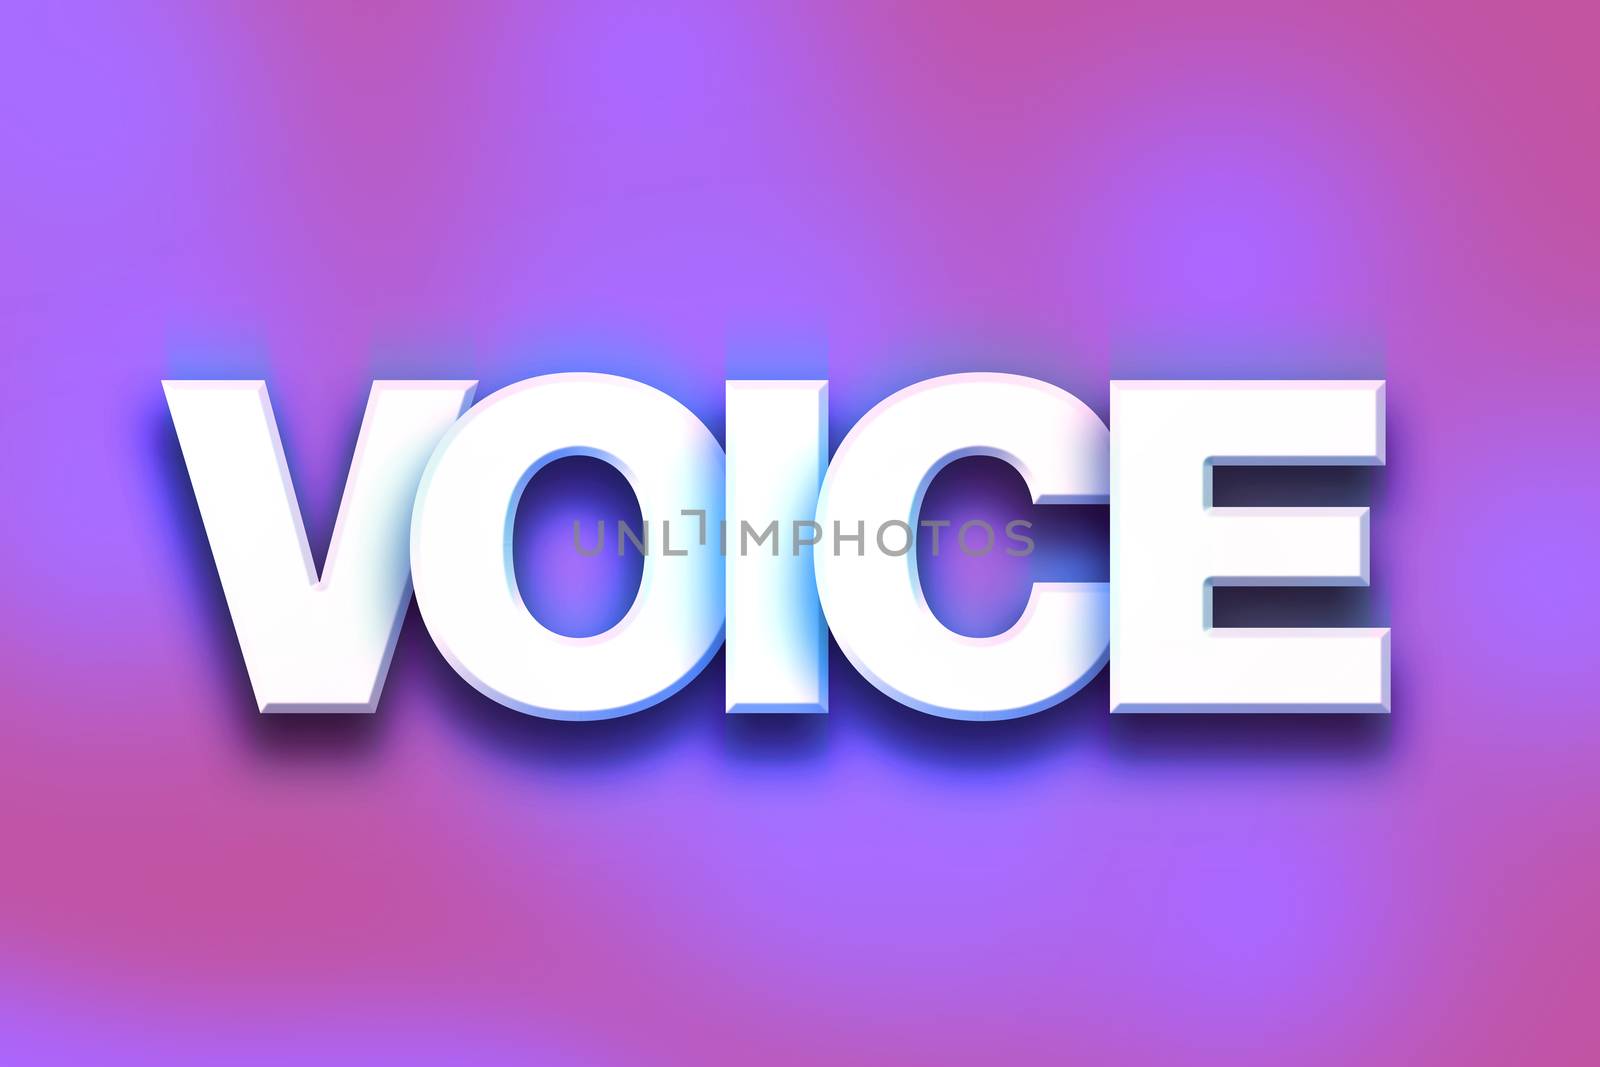 The word "Voice" written in white 3D letters on a colorful background concept and theme.